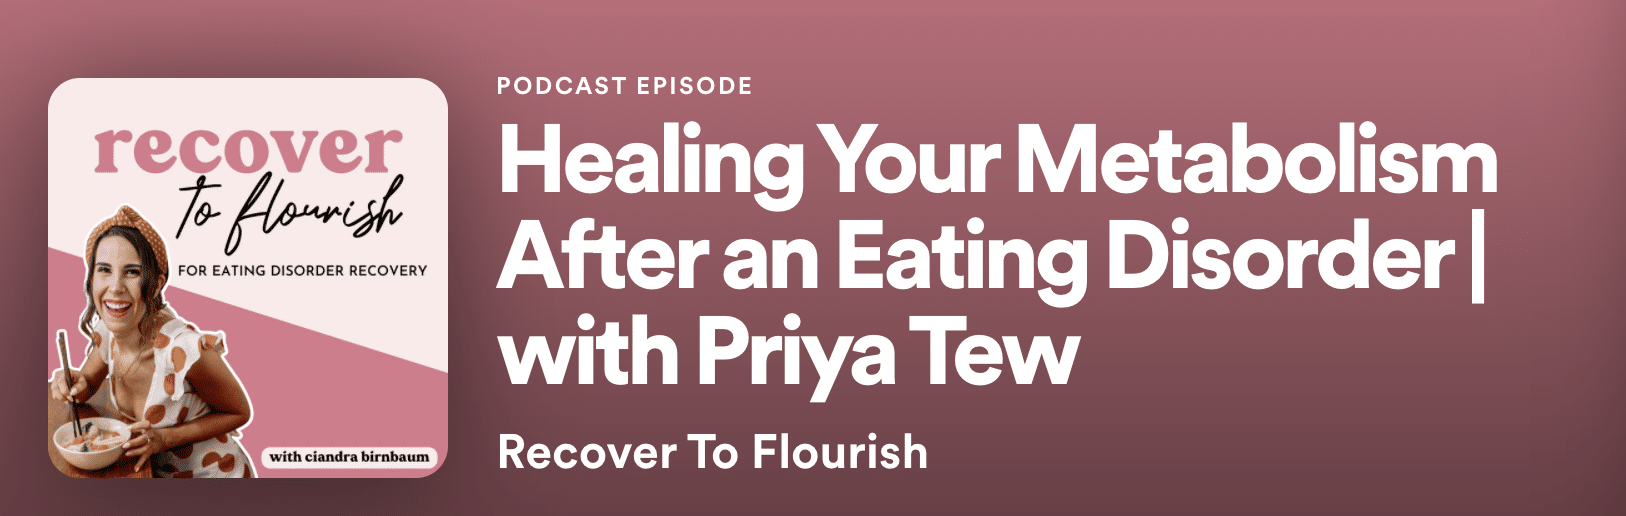 Podcast art for recoveyr to flourish podcast episode "Healing your metabolism after an eating disorder"